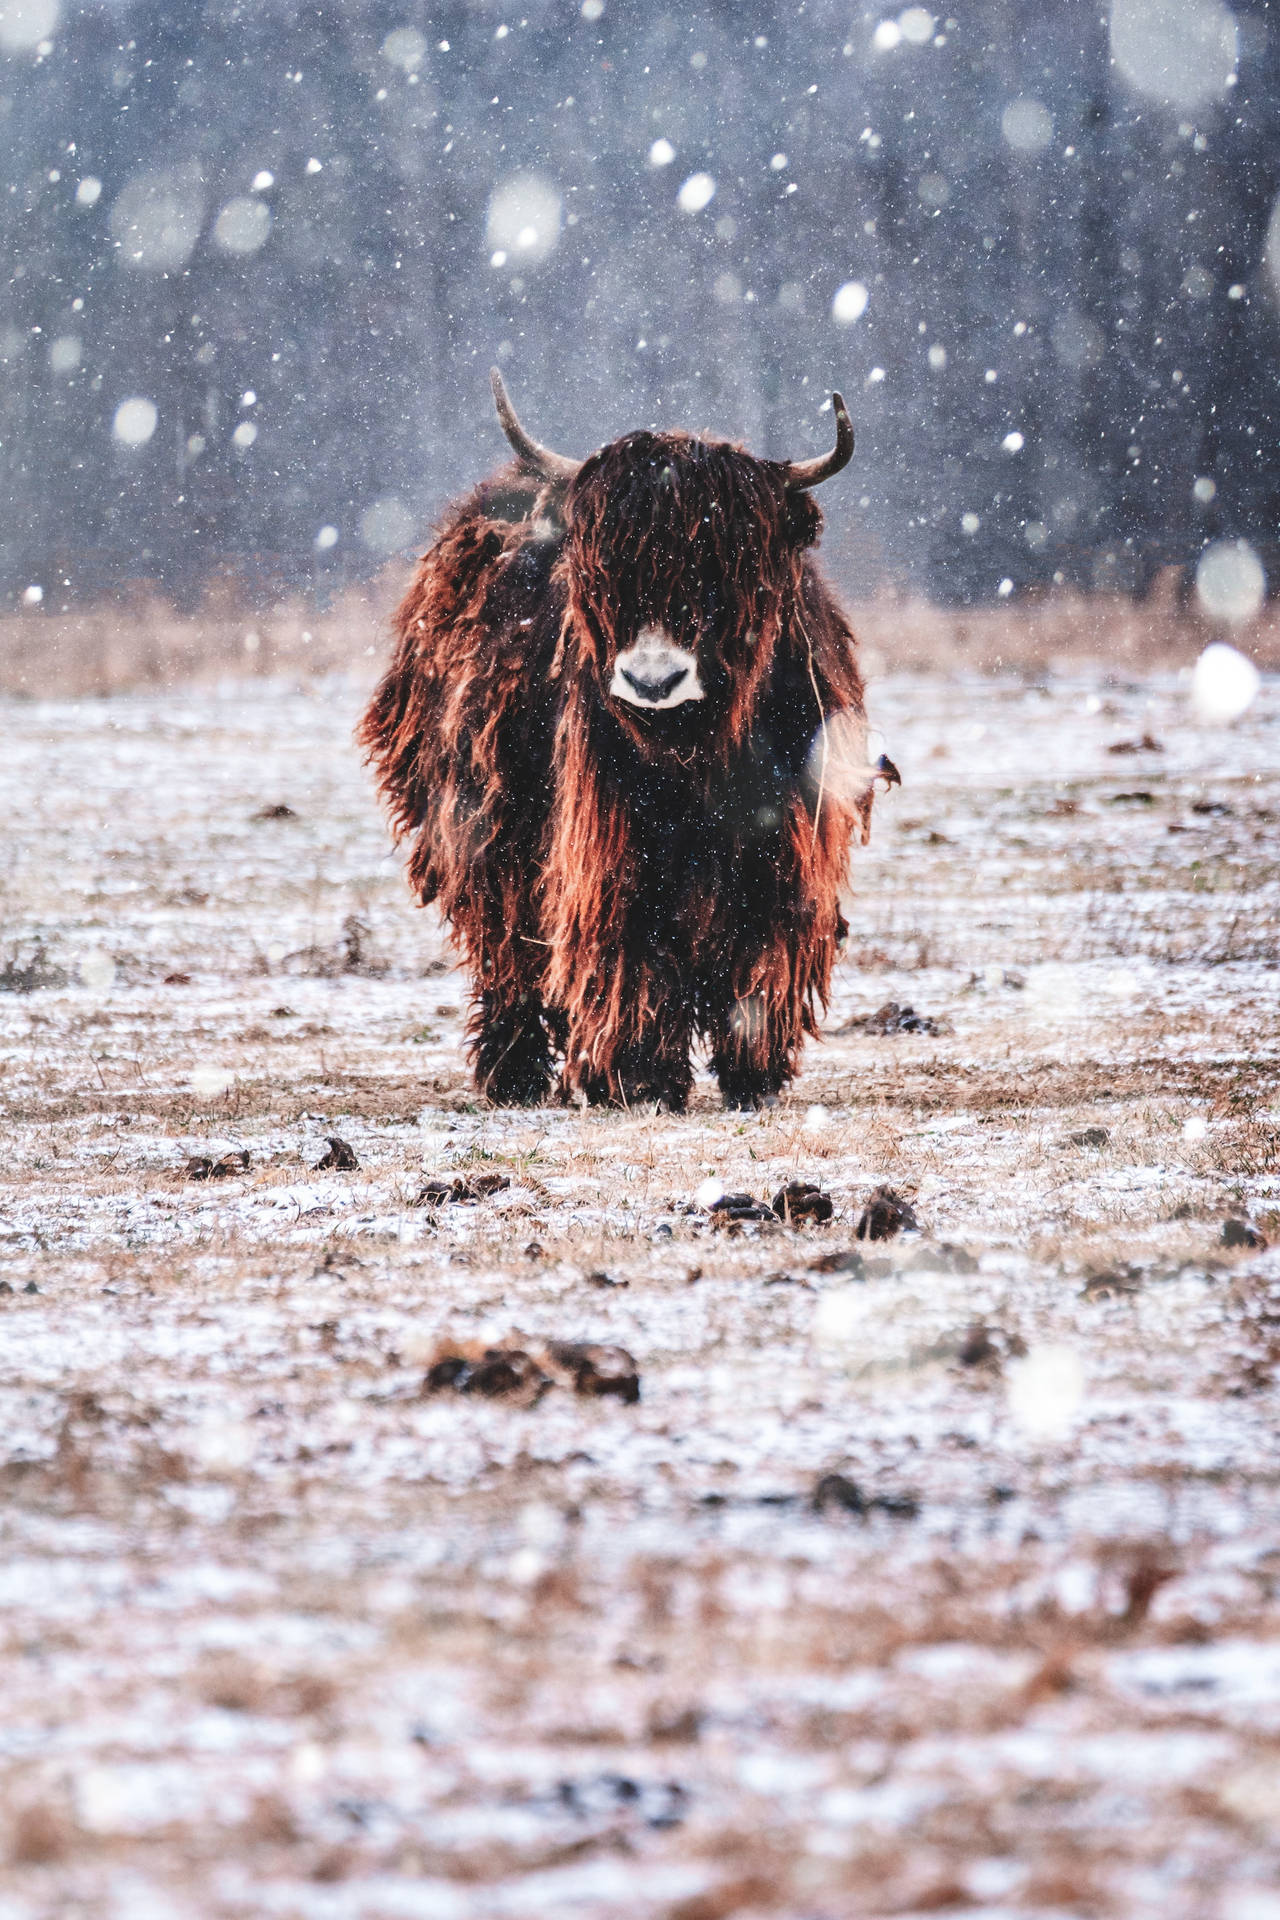 Yak Brown On Grass While Snowing Wallpaper